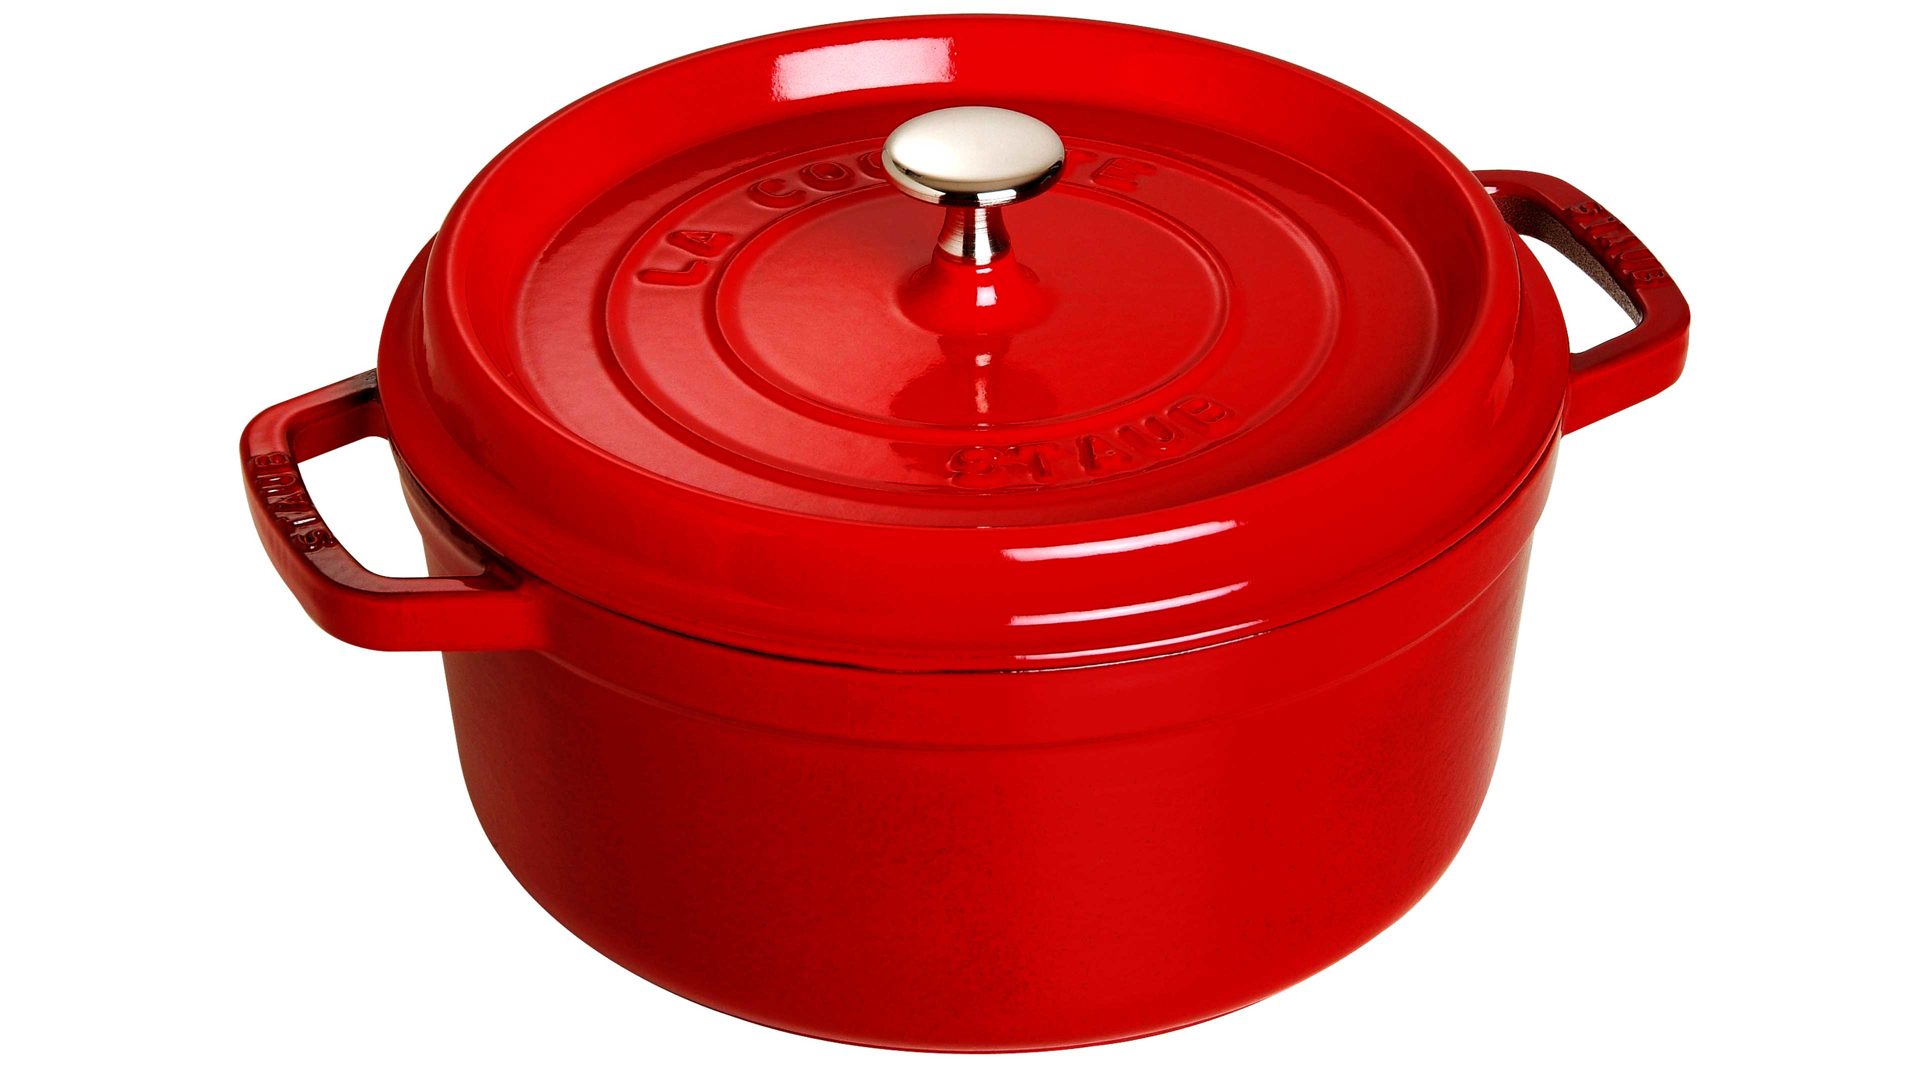 Topf Zwilling® aus Metall in Rot staub® Cocotte kirschrotes Gusseisen - ca. 3,8 Liter